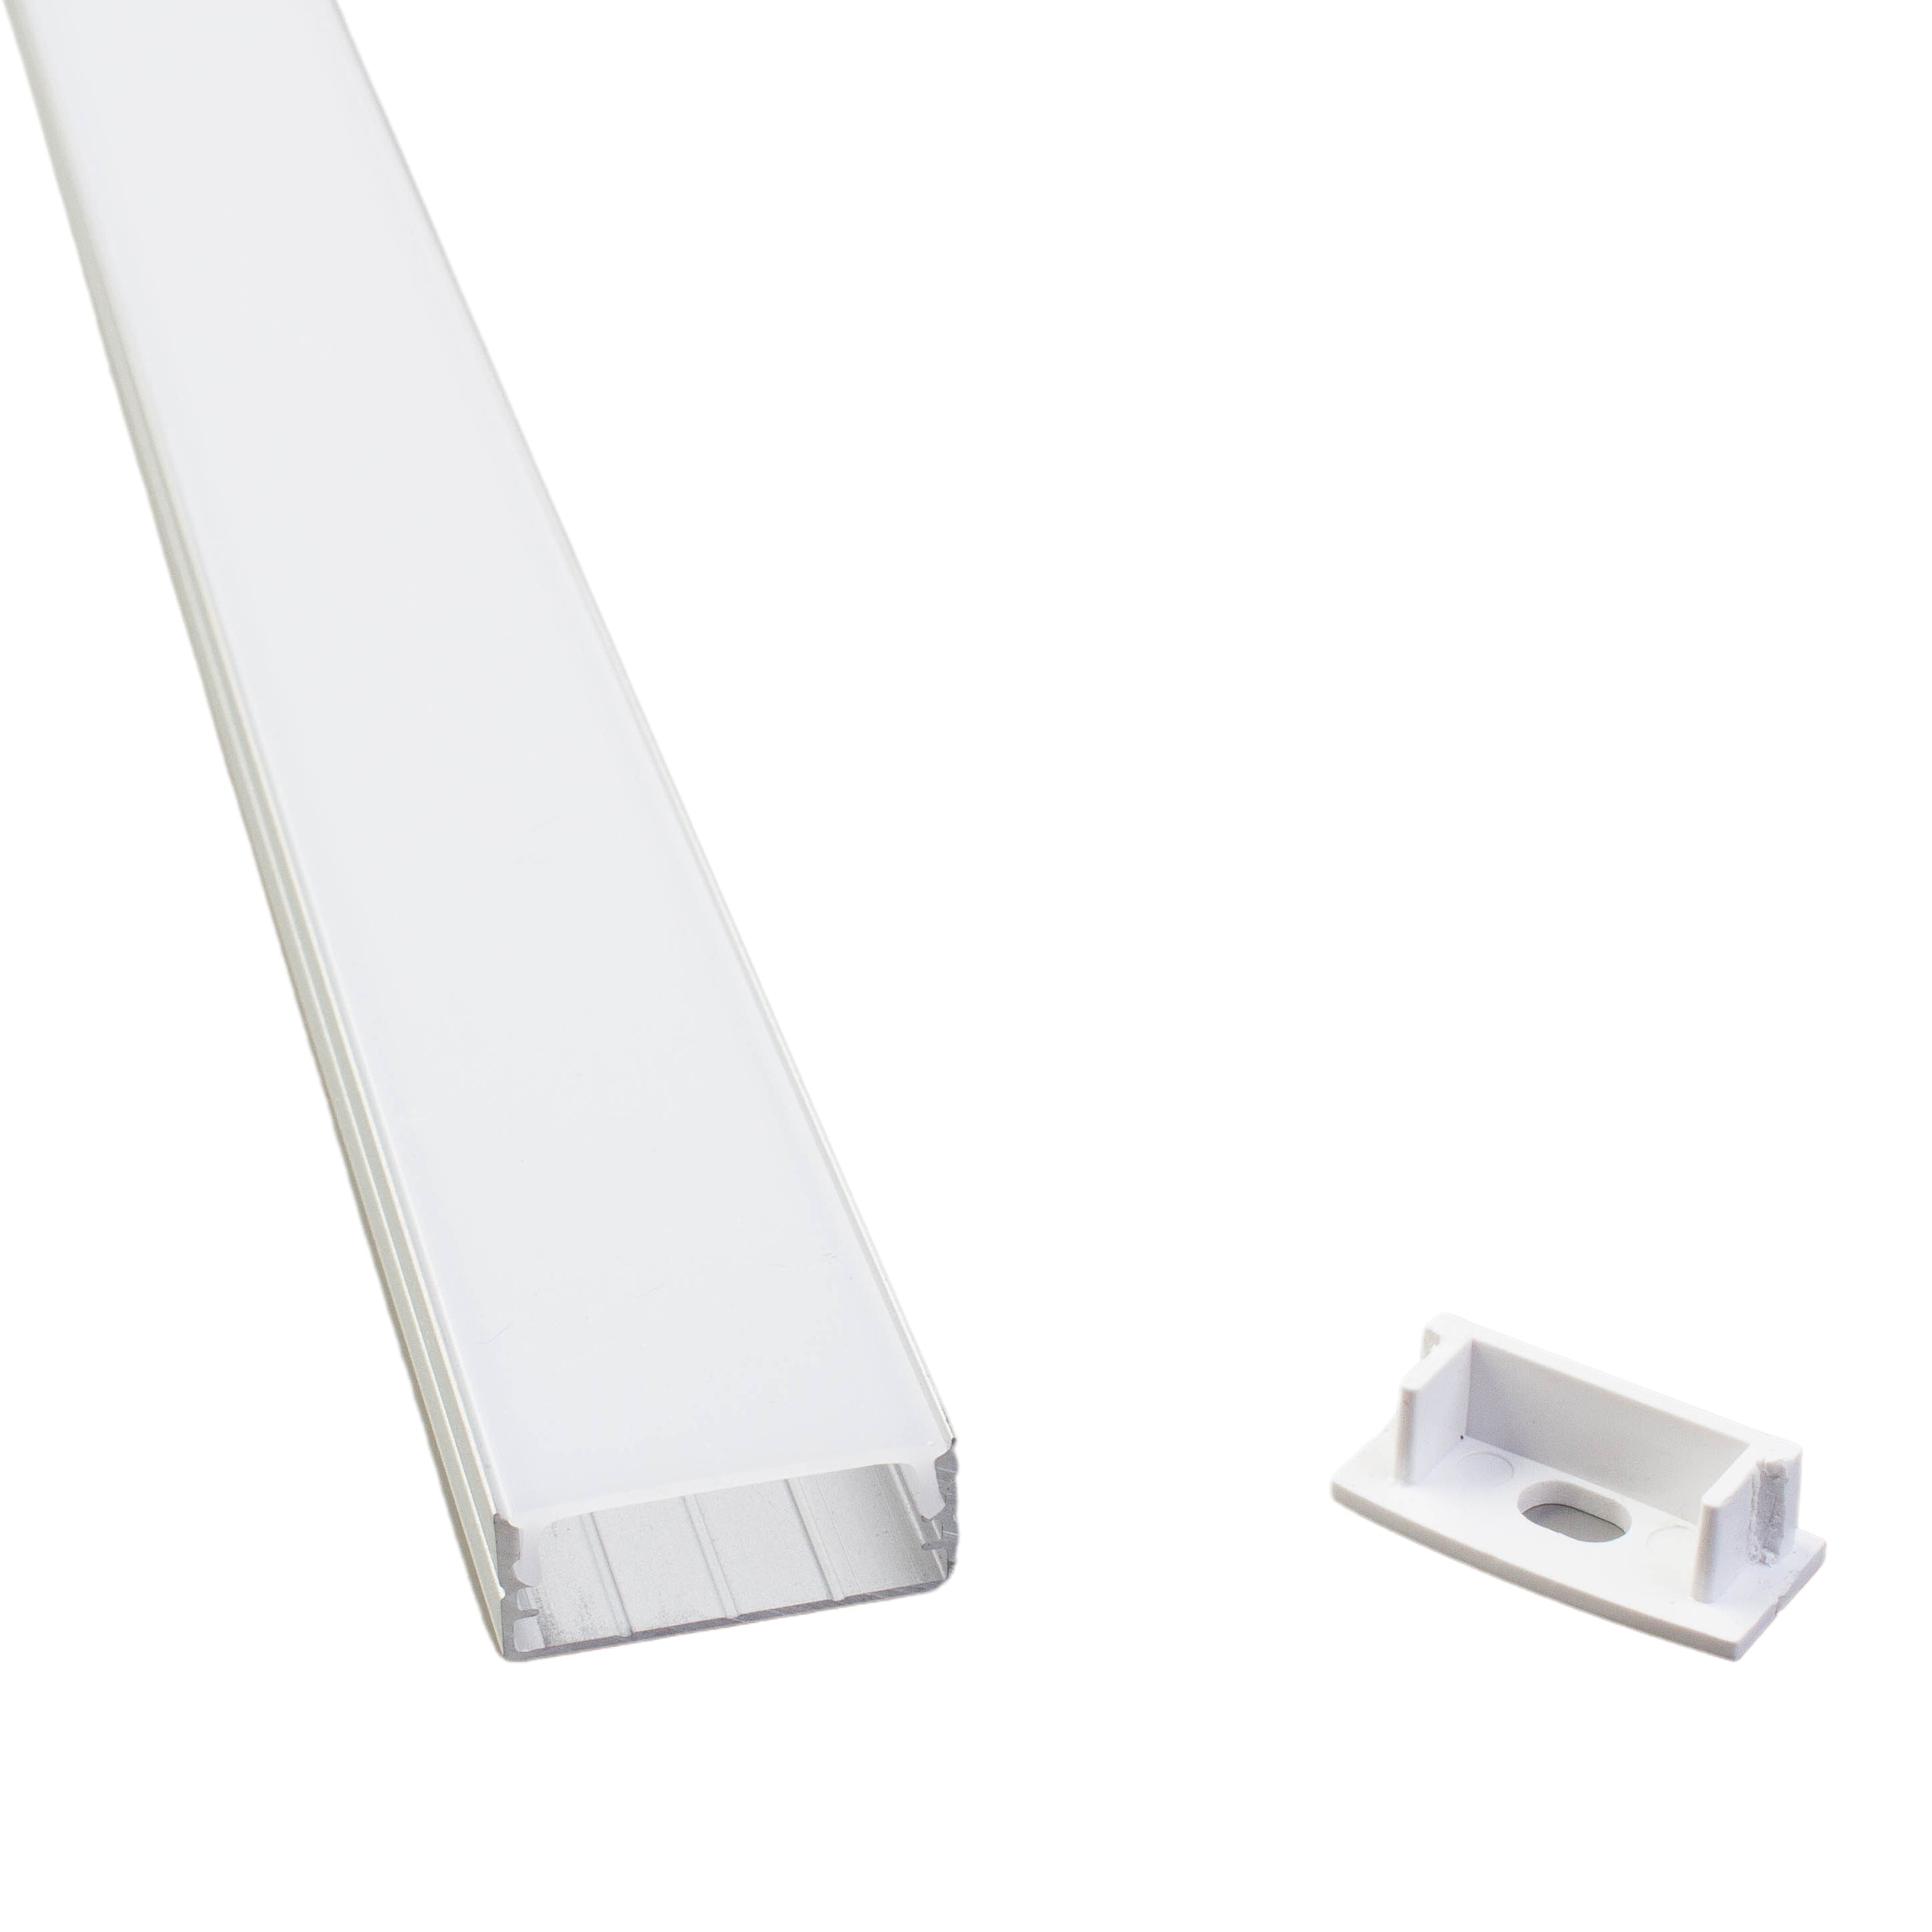 40" Extra Wide Aluminum Channel with Cover for LED Strip Light - Fits up to 20mm Strip (6pk)